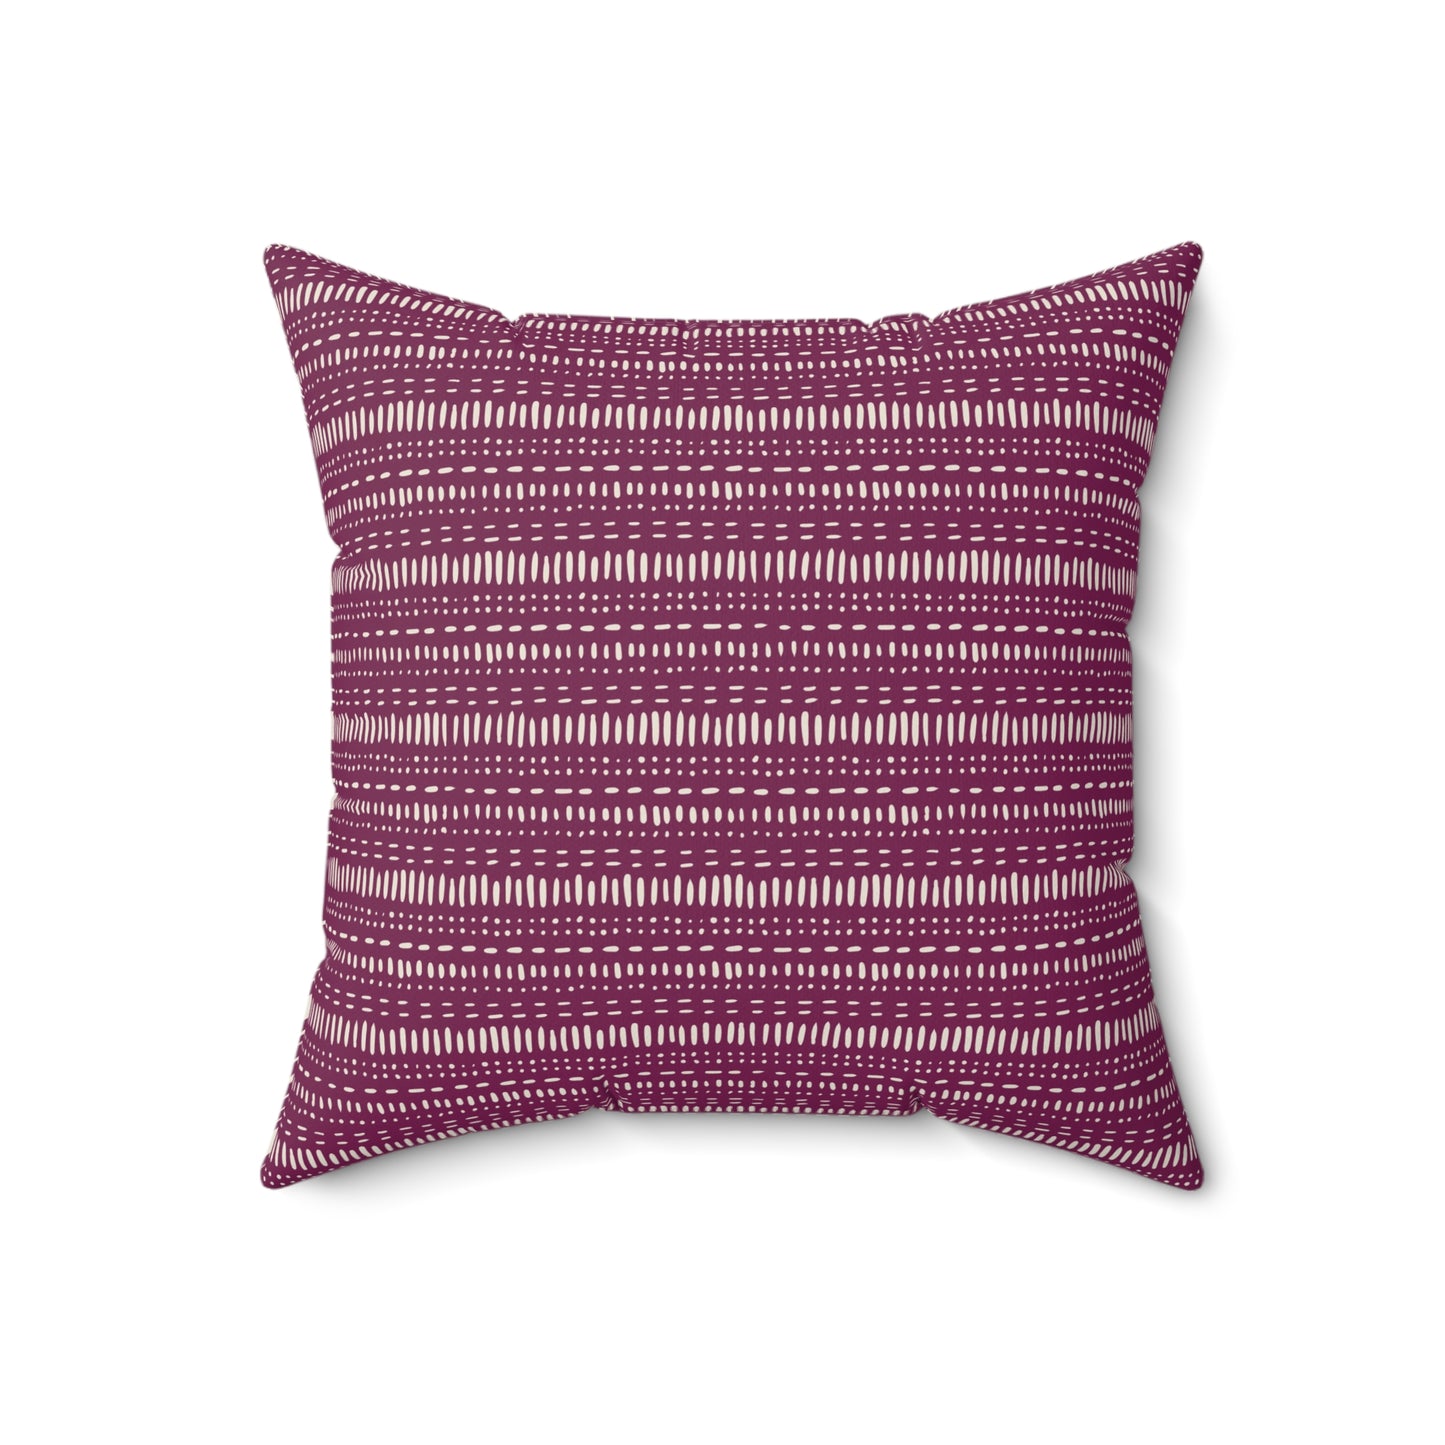 Boho Vibes Pattern 8 - Faux Suede Square Pillow